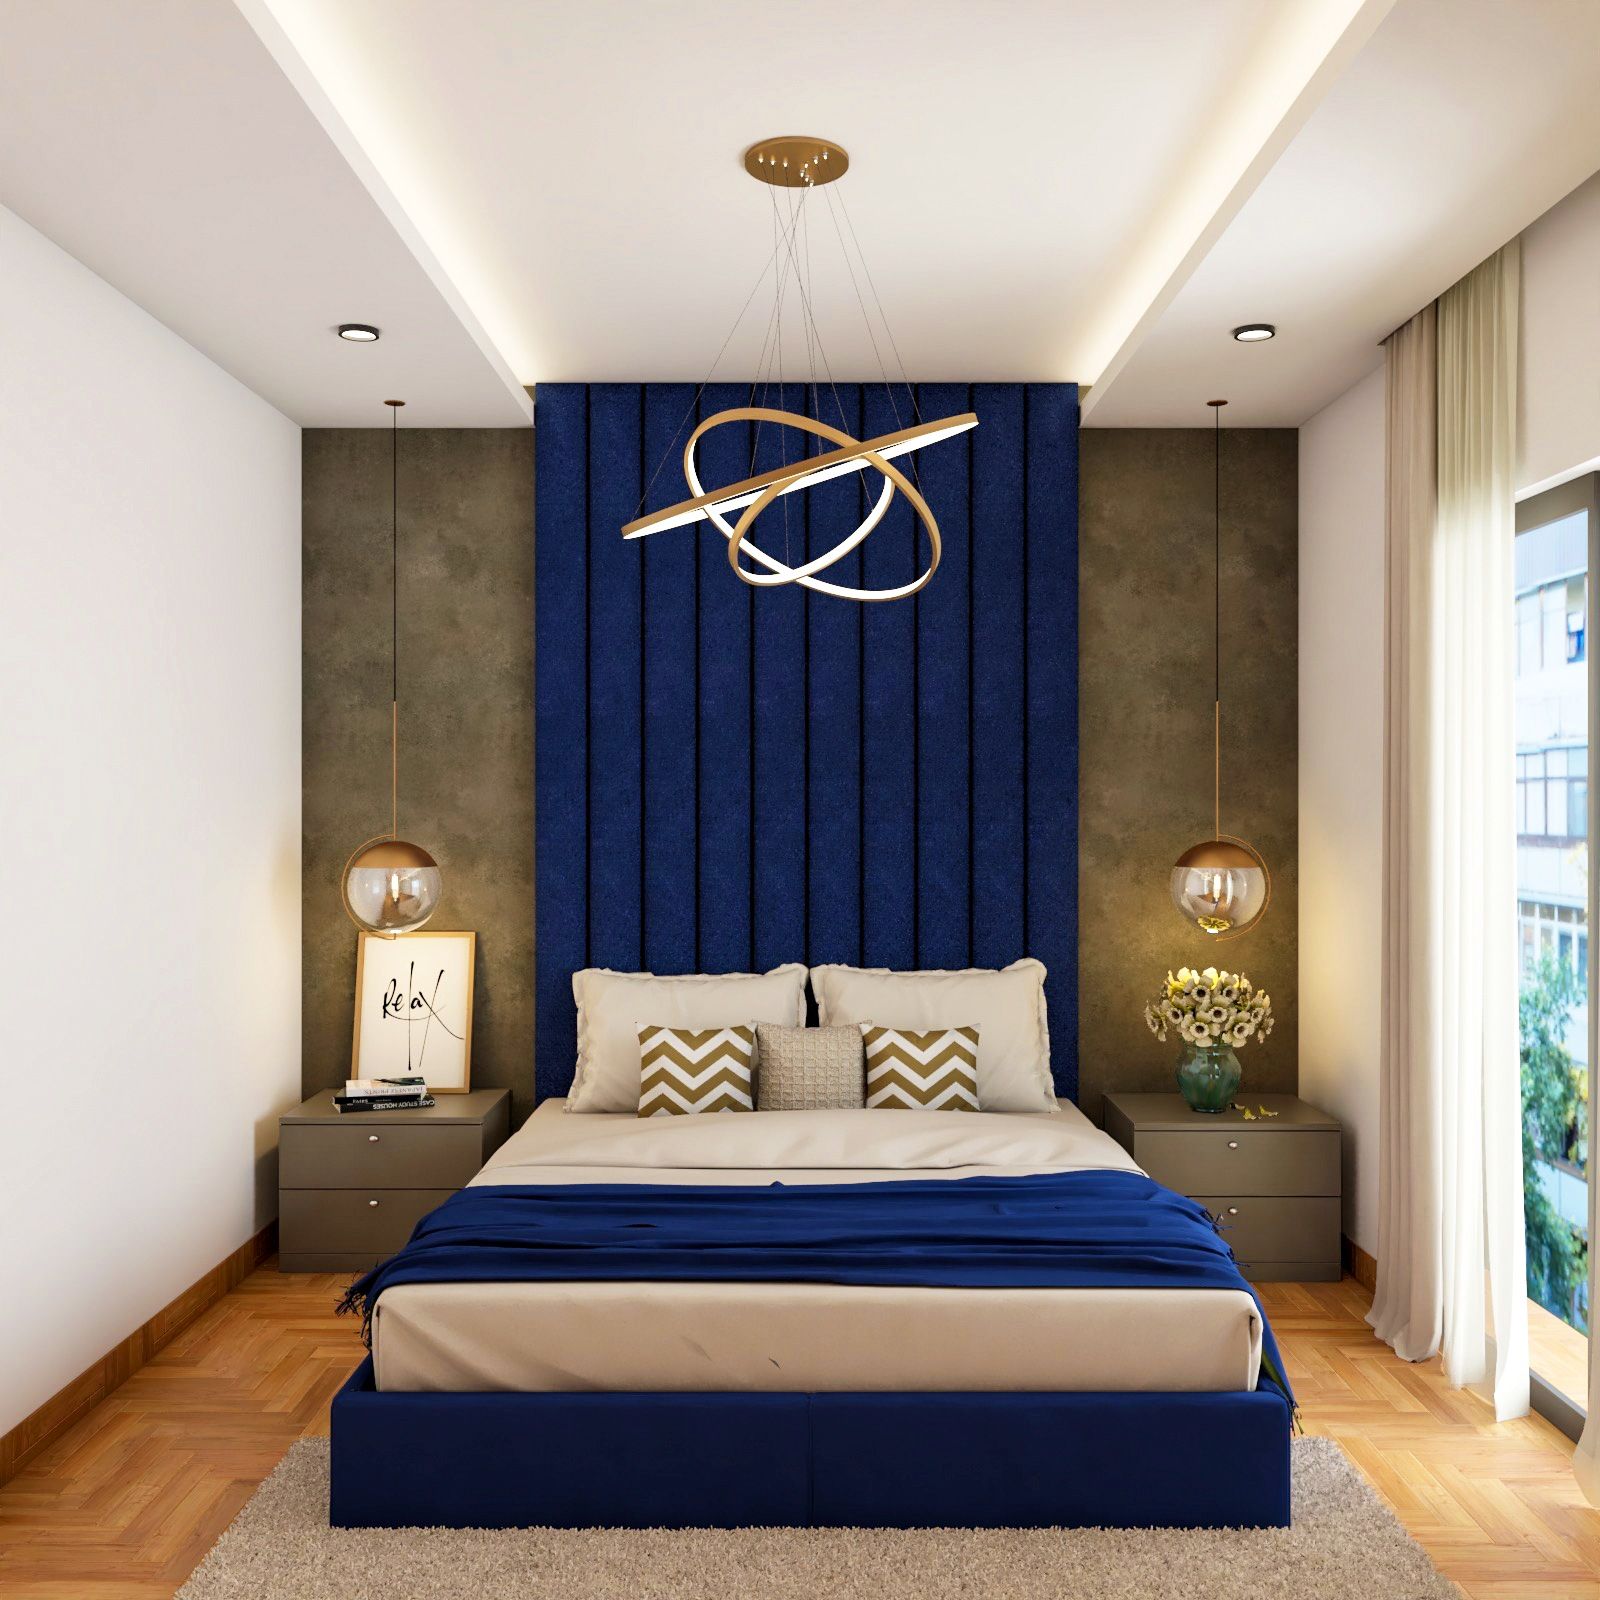 Rectangular Bedroom Ceiling Design With Recessed Cove Lights And Blue Tufted Wall Paneling